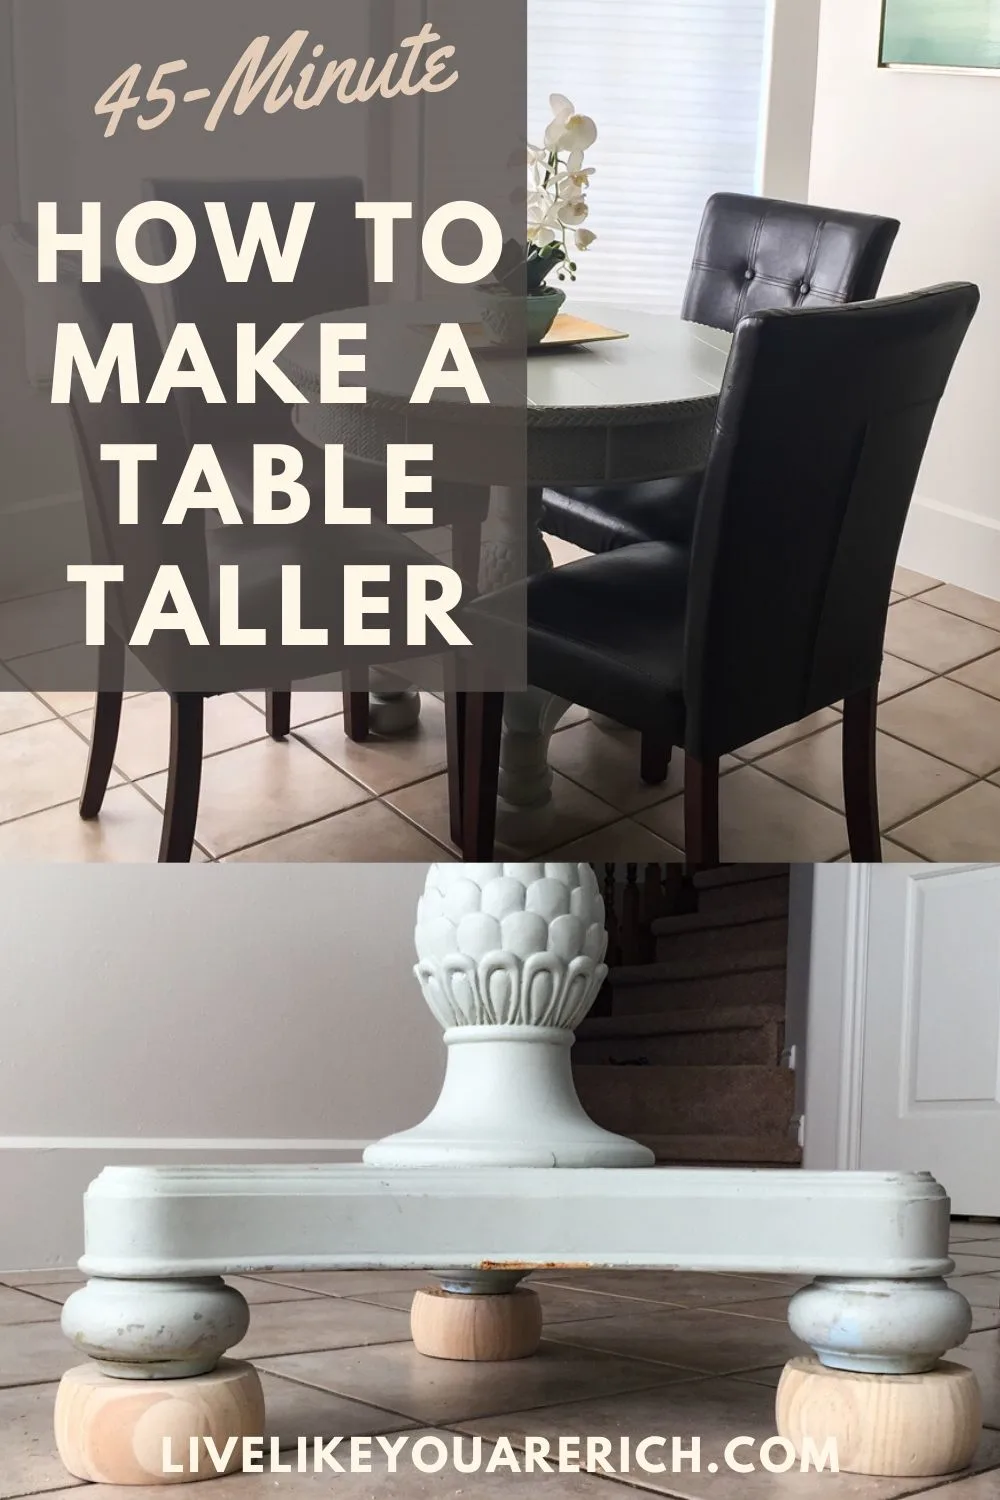 I have a small table that I bought 5 years ago. I decided to make it taller. My little table measures just over 30 inches tall and fits my dining chairs perfectly. It has been very functional and was inexpensive, easy, and quick. I hope this is helpful if you need to make a table taller as well!